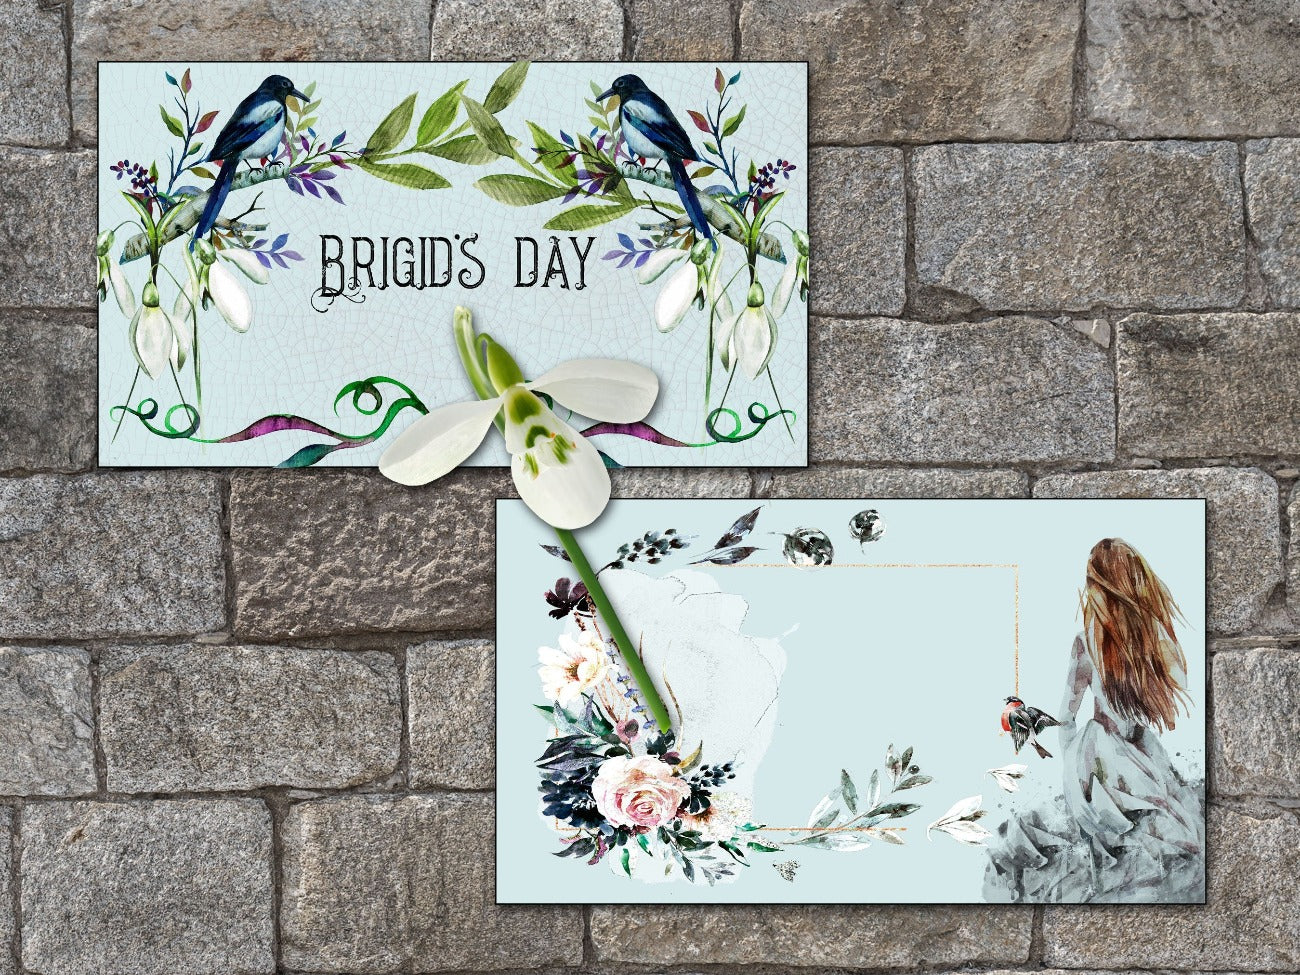 Two IMBOLC LABELS details, pale blue background, colorful scroll borders, snowdrop florals, red haired goddess, birch twigs and magpies - Morgana Magick Spell